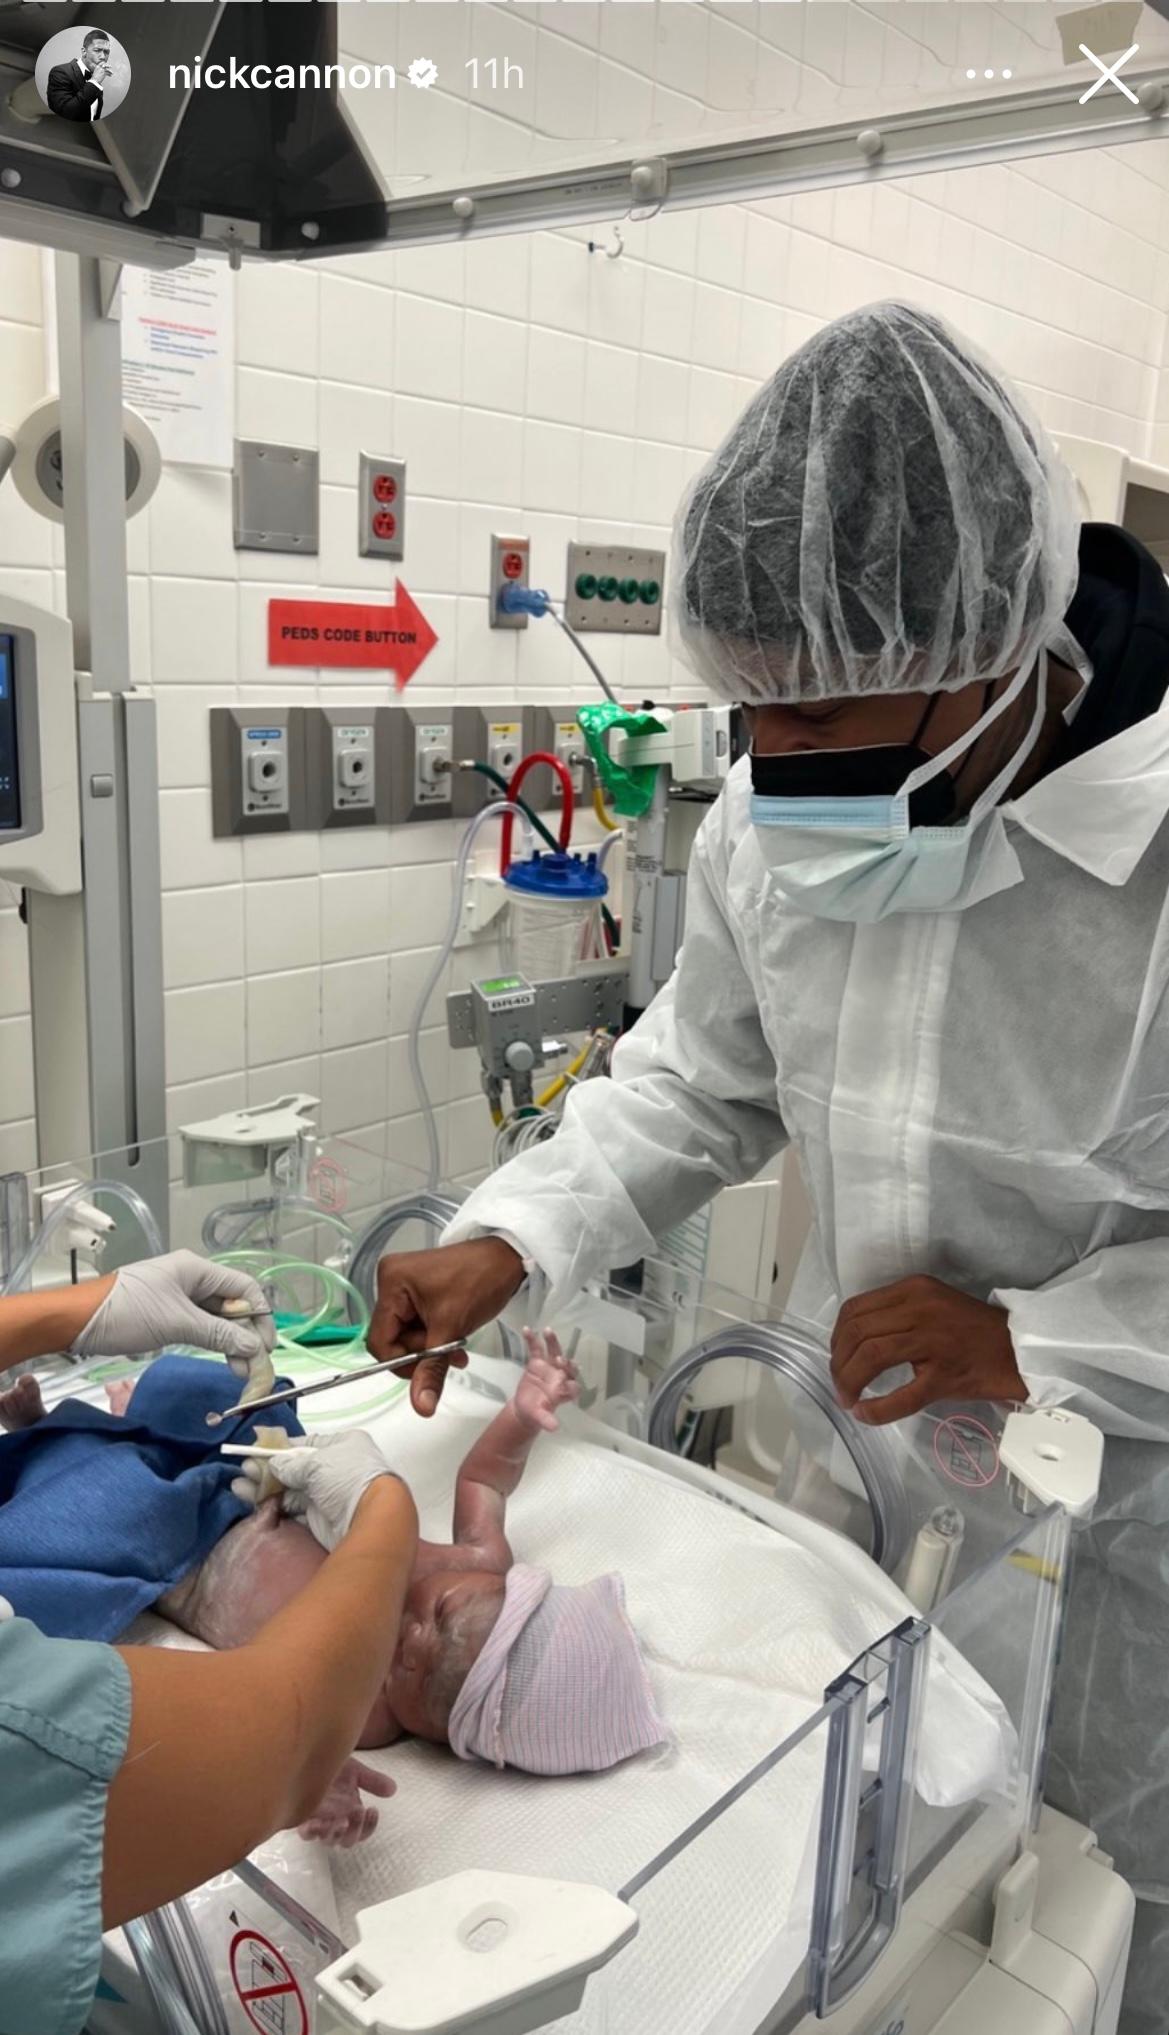 Nick Cannon shares photo of cutting daughter Onyx's umbilical cord for her 1st birthday